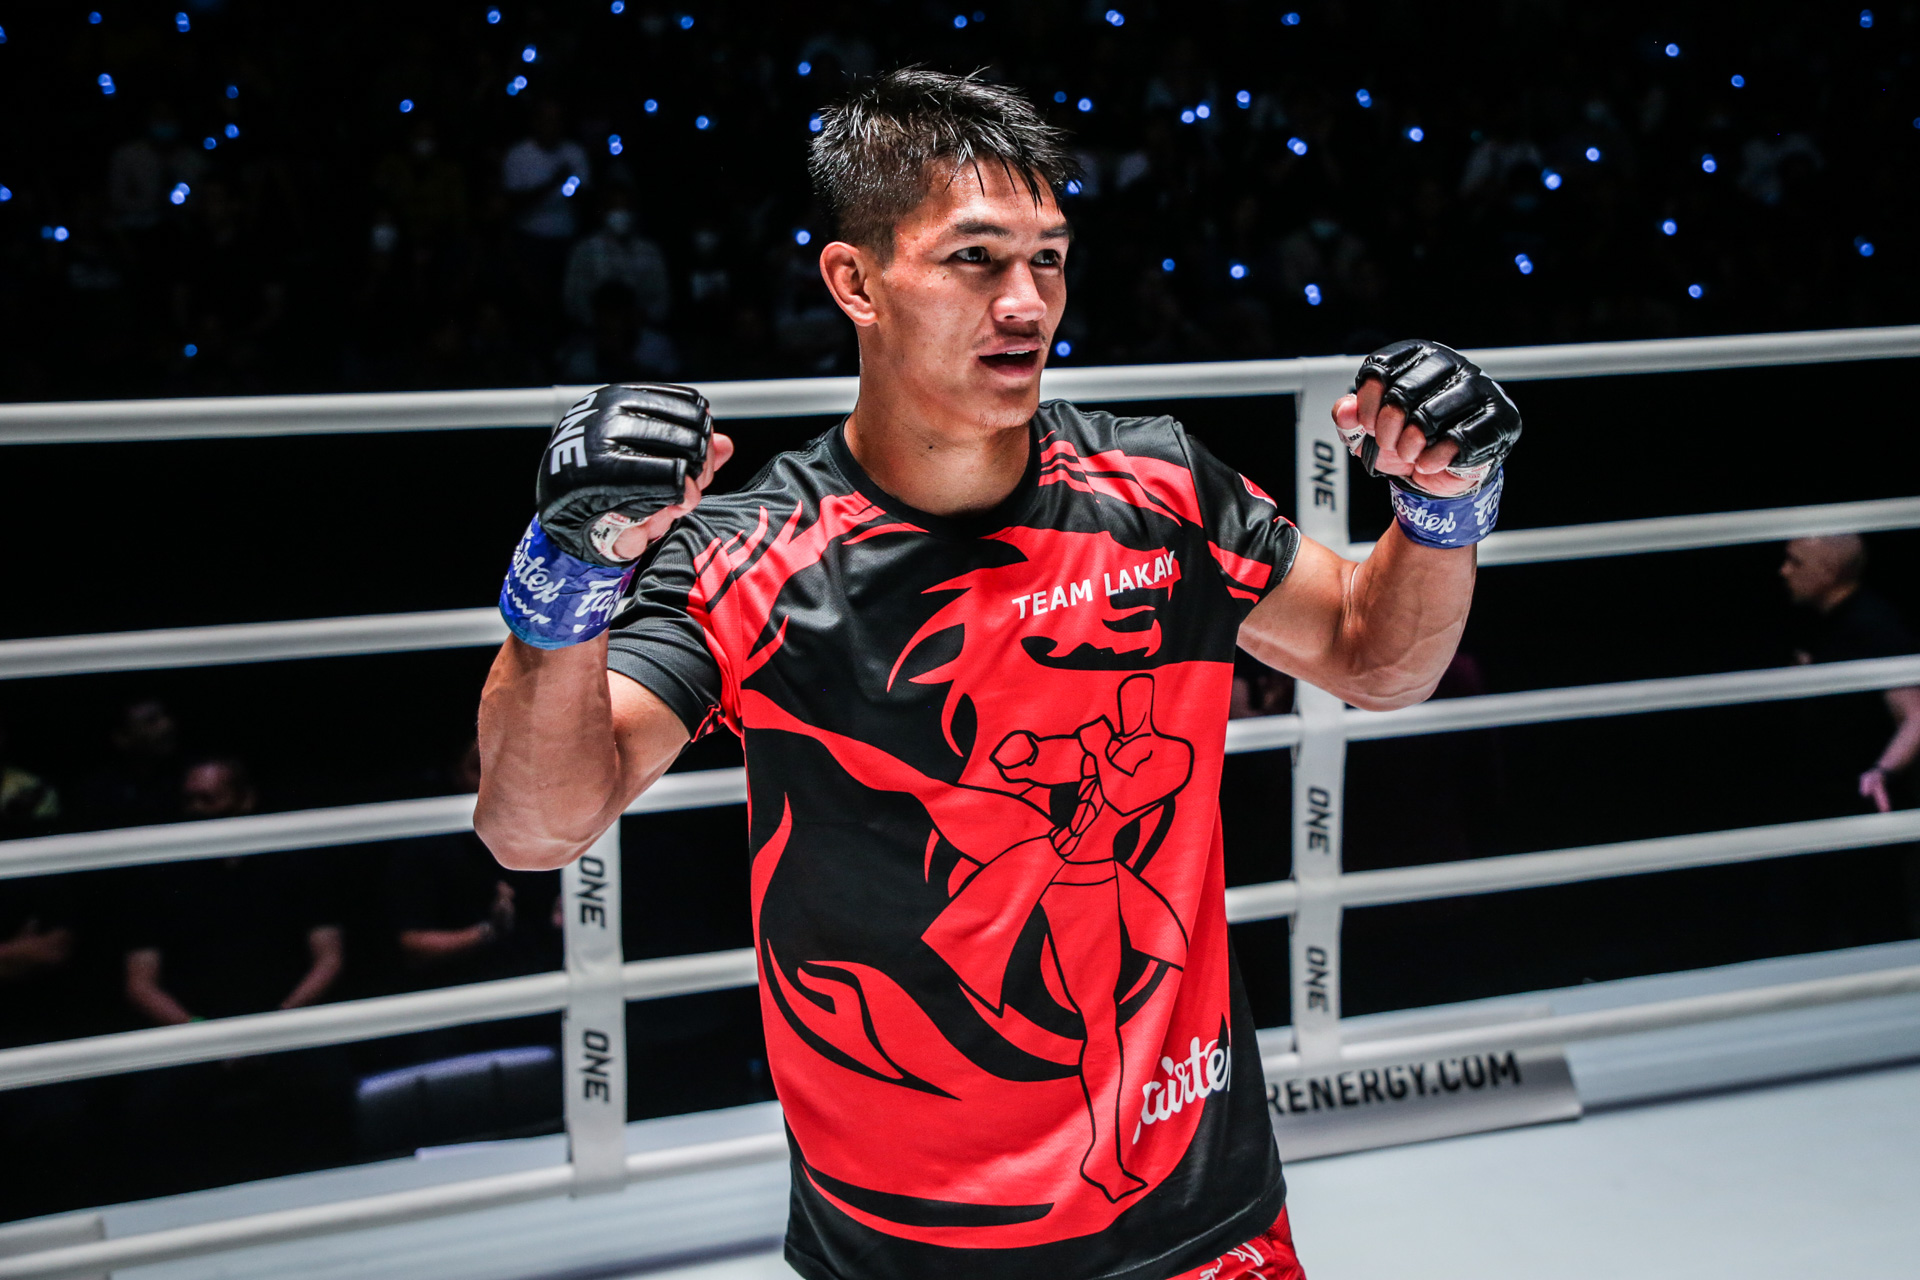 'We can do all aspects of MMA': Kingad after impressive win